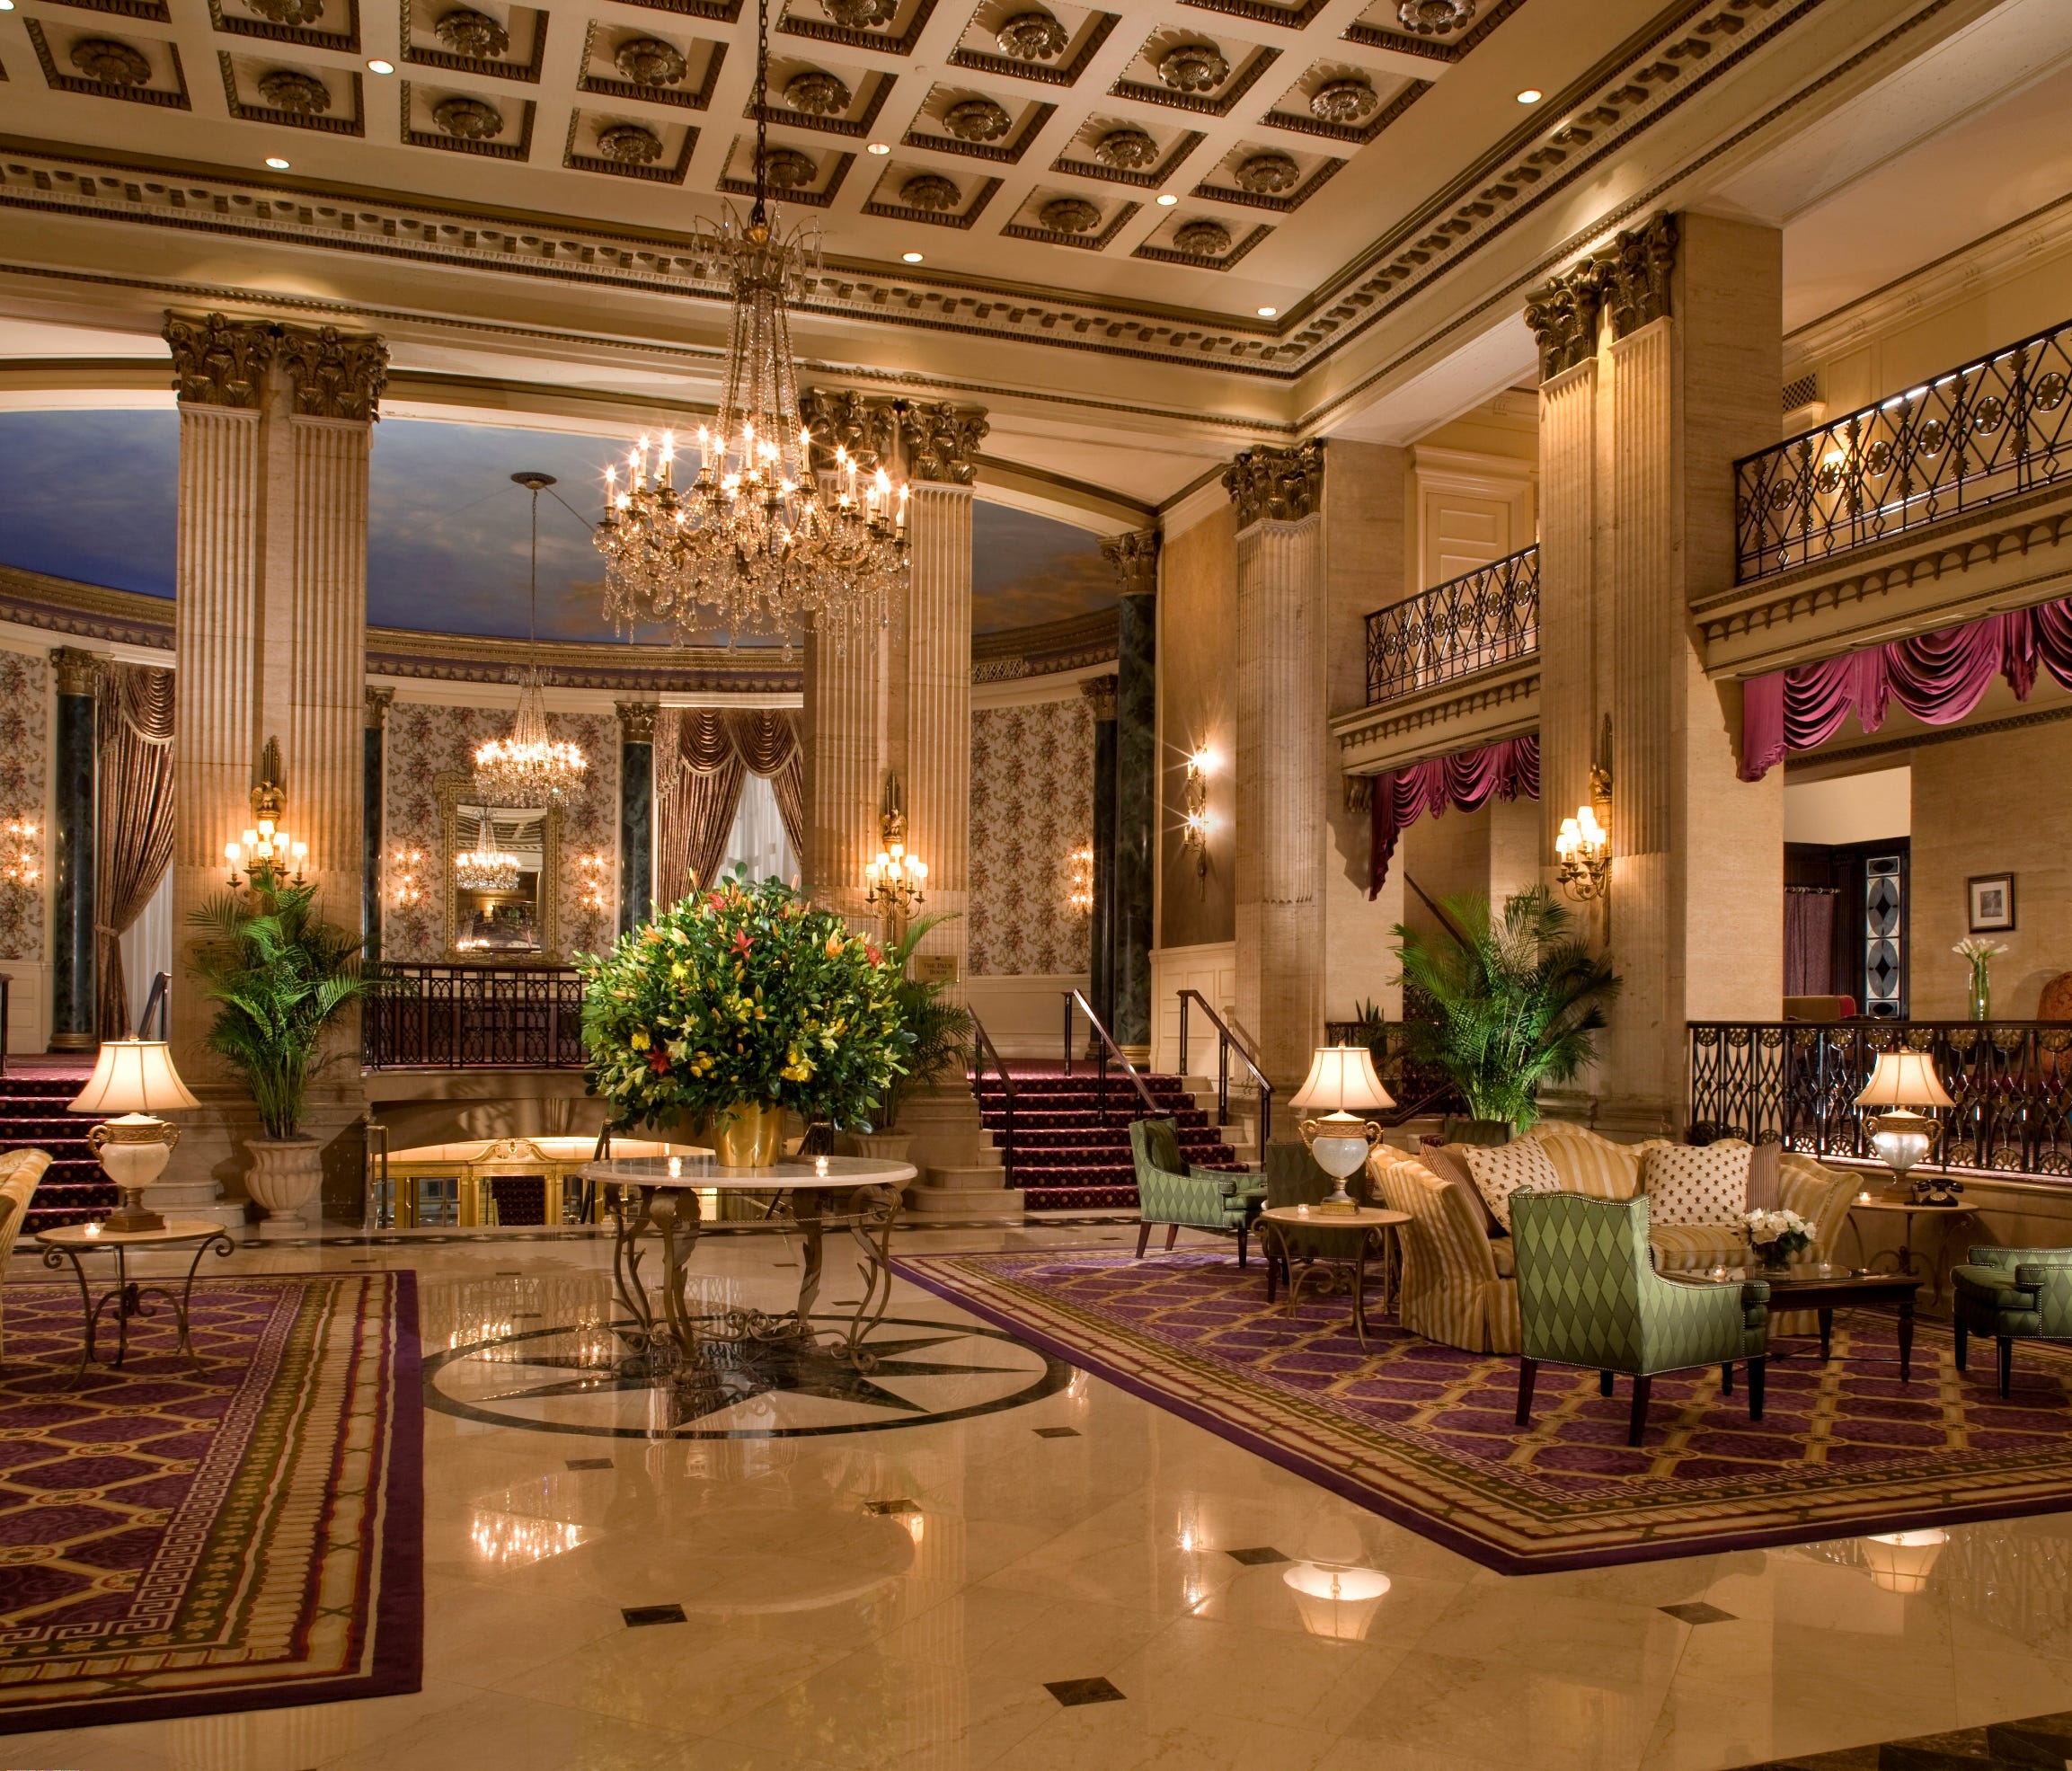 The Roosevelt Hotel, New York City is the most in demand property in the Big Apple, according to Expedia.